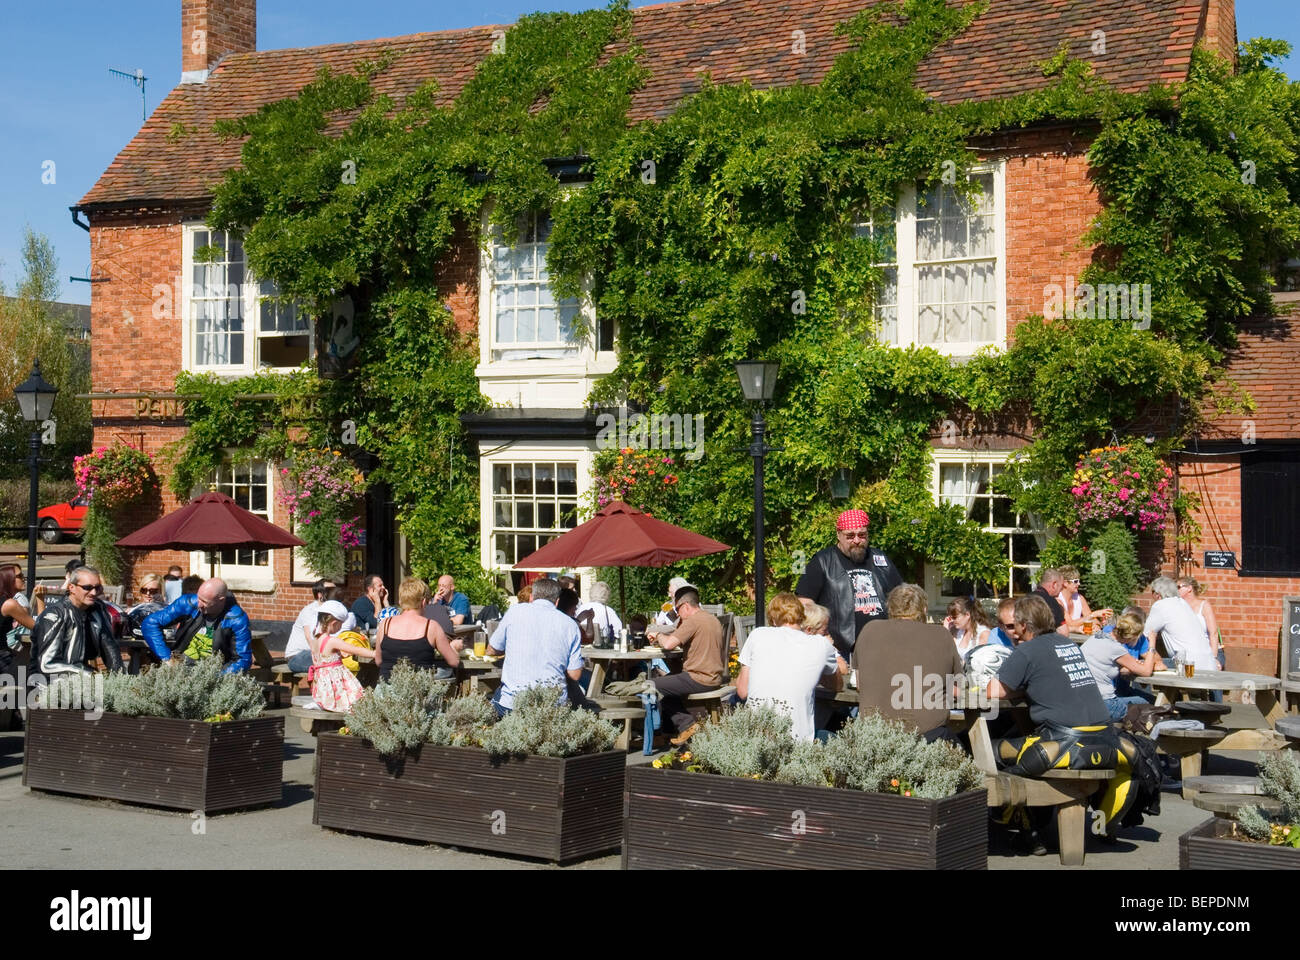 People outside the Pen and Parchment Public House Stratford-upon-Avon drinking Stock Photo